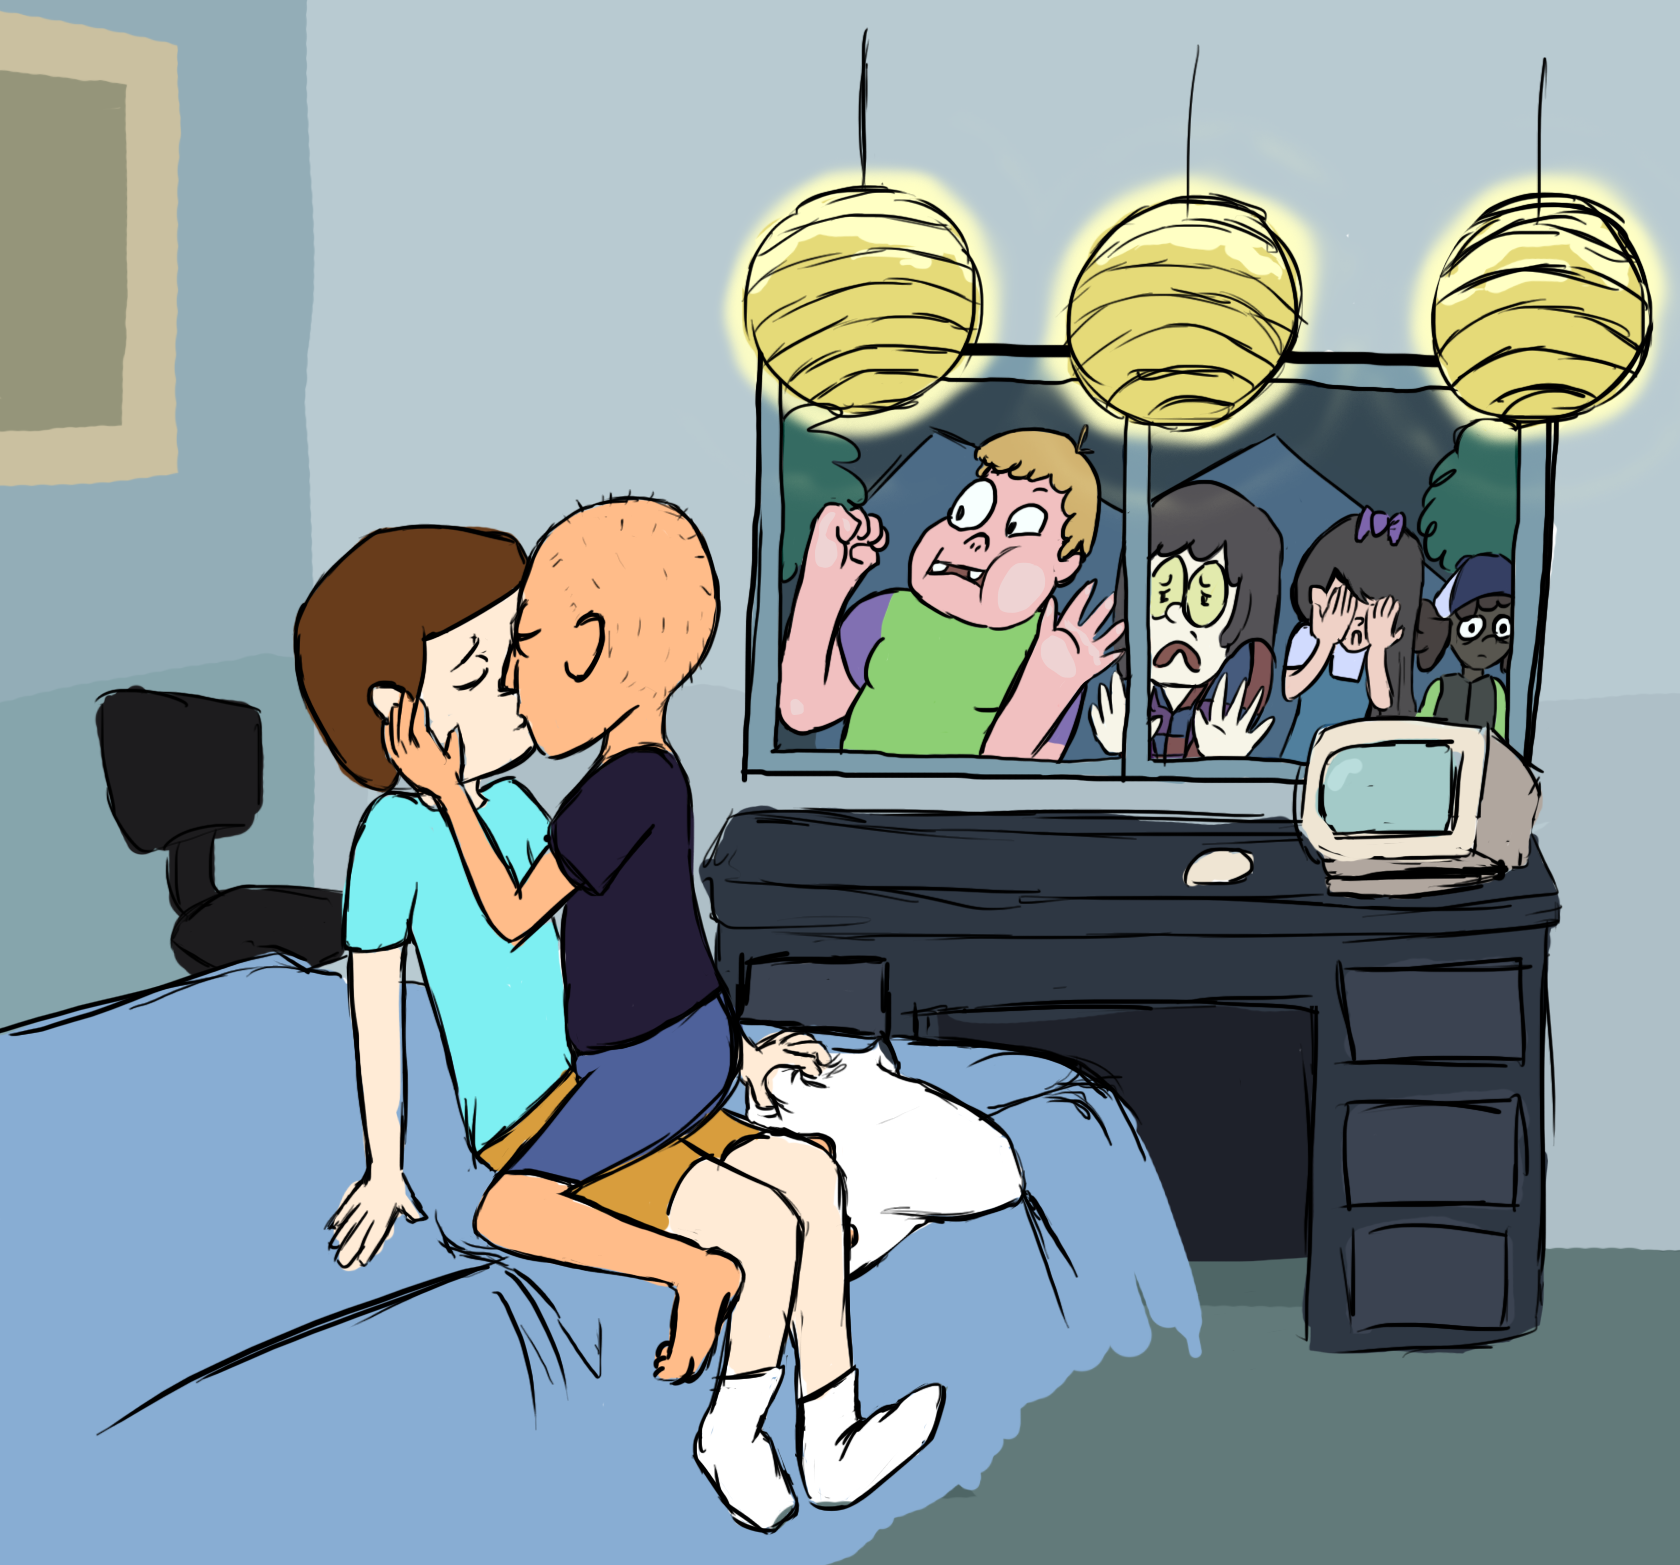 Jeff And Sumo Slumber Party By Pzychopilz On DeviantArt.